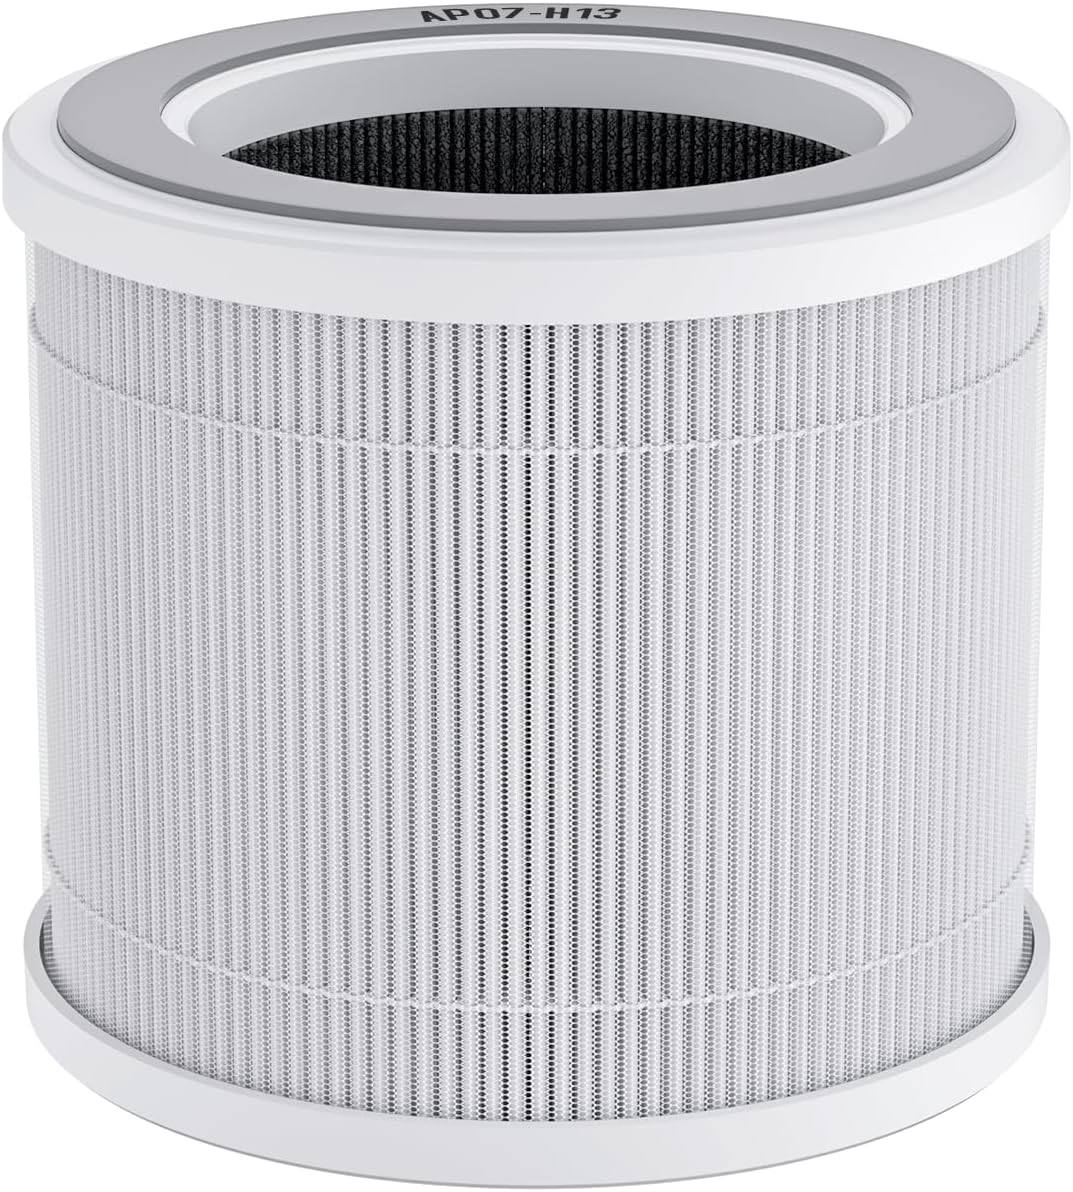 I ordered these because the advert said it was compatible with the brand air purifier I use.I think I read it wrong because these filters are too small although these filters do look and feel good.I do not know what to do with them now as they do not fit my purifier.